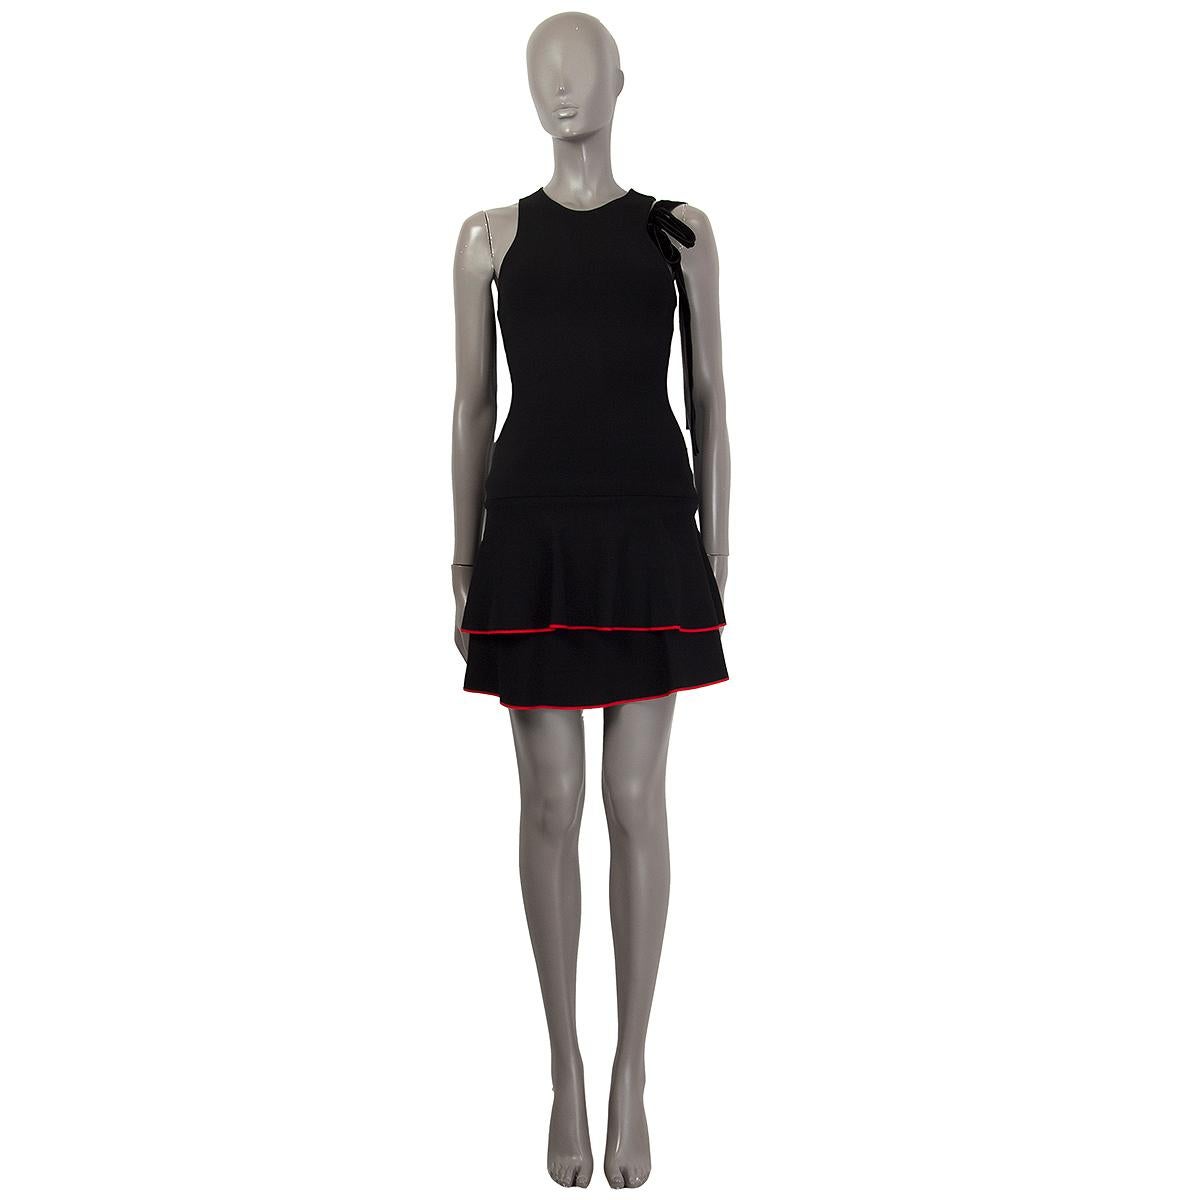 100% authentic Proenza Schouler sleeveless fit-to-flare dress in black viscose (75%) and polyamide (25%) with a round neck and red trimming details. Comes with a black detachable velvet bow detail. Unlined. Has been worn and is in excellent